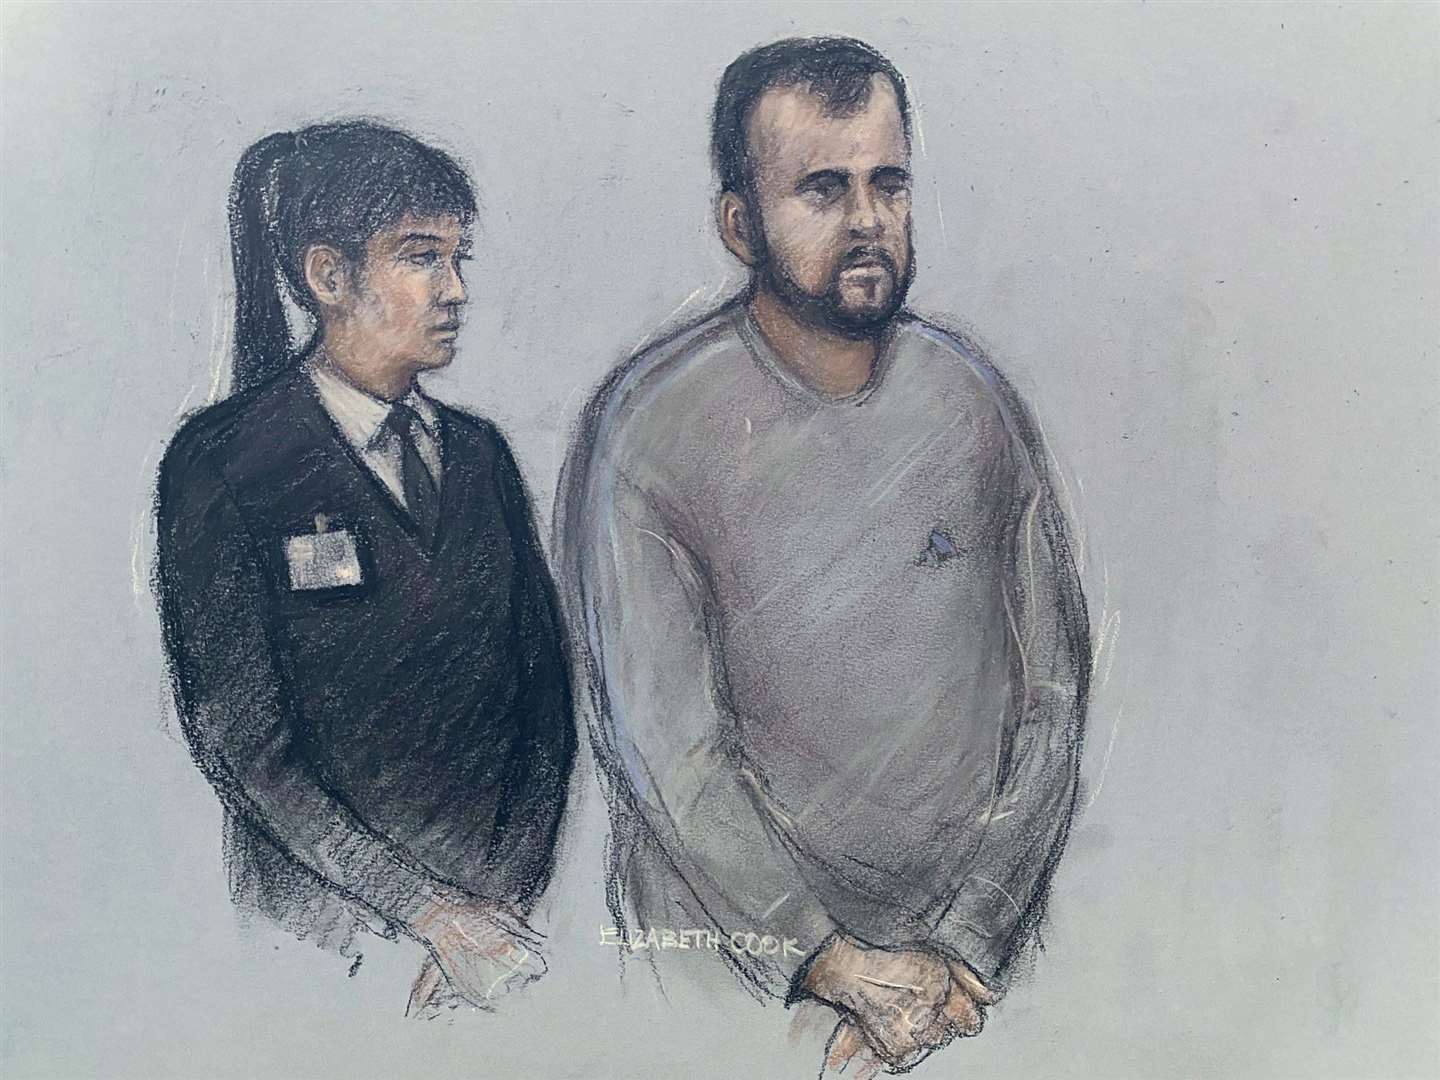 Court artist sketch of Joby Pool, appearing in the dock at Telford Magistrates’ Court in March (Elizabeth Cook/PA)